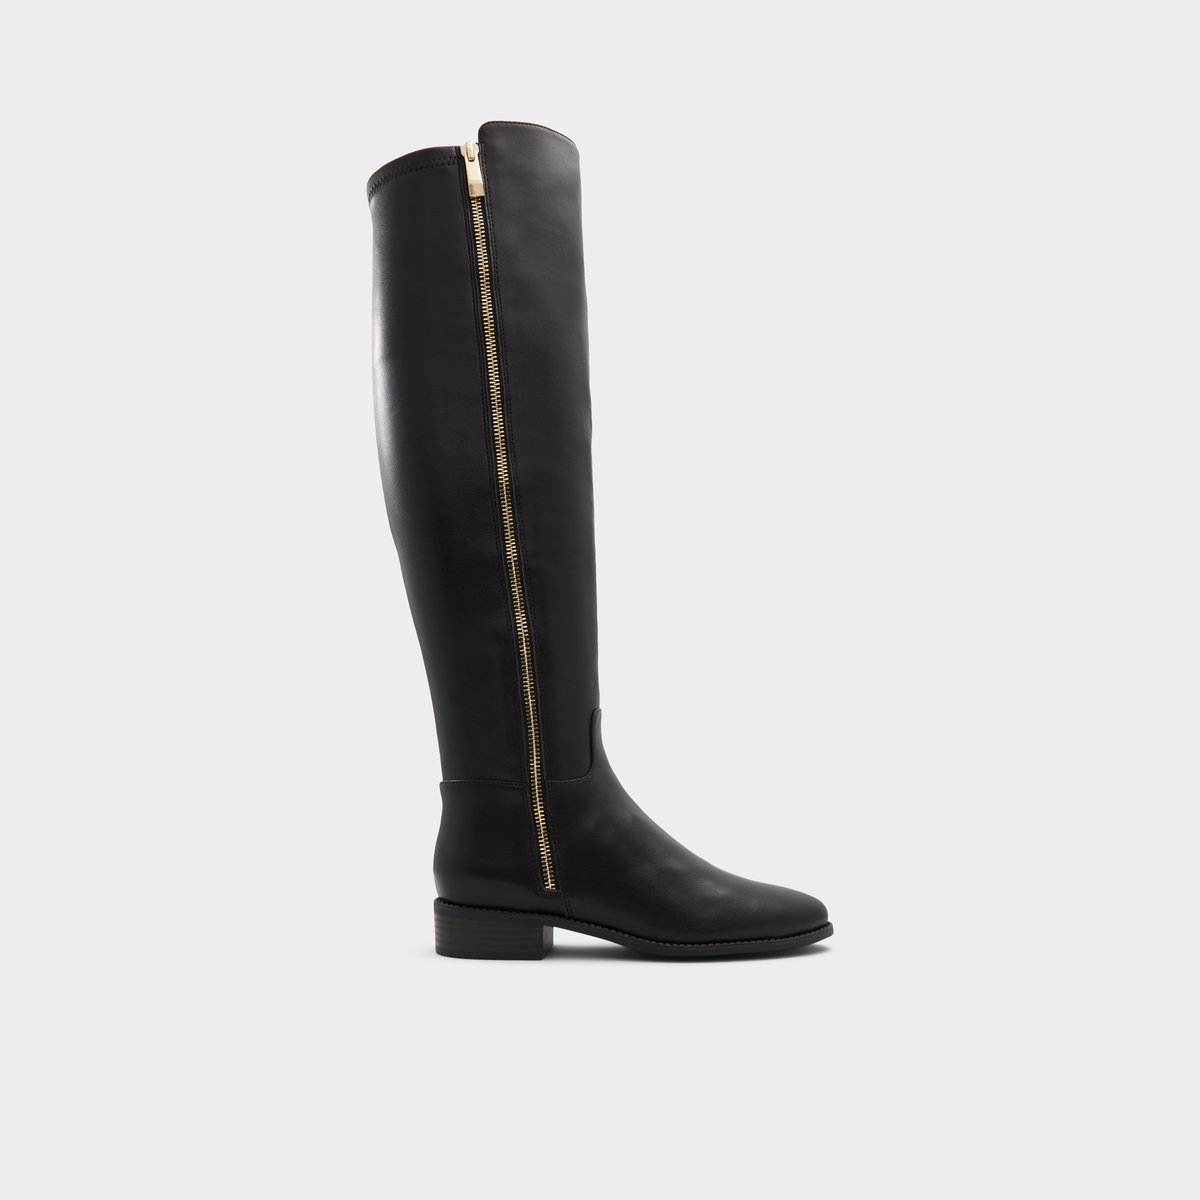 Aahliyah Black Textile Women's Tall Boots | ALDO Canada